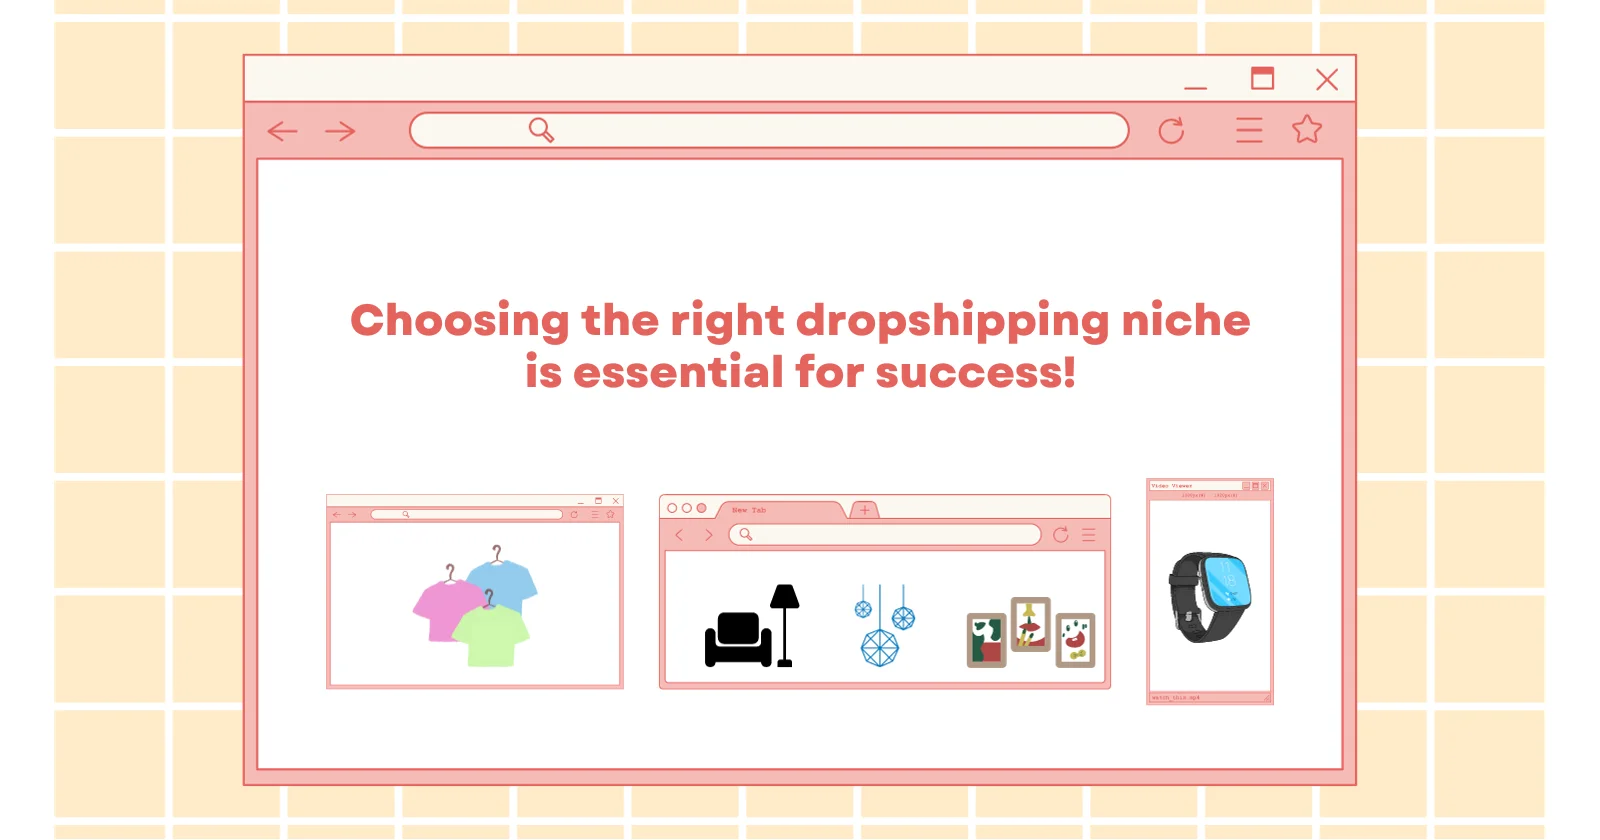 How to Choose the Right Dropshipping Niche for You